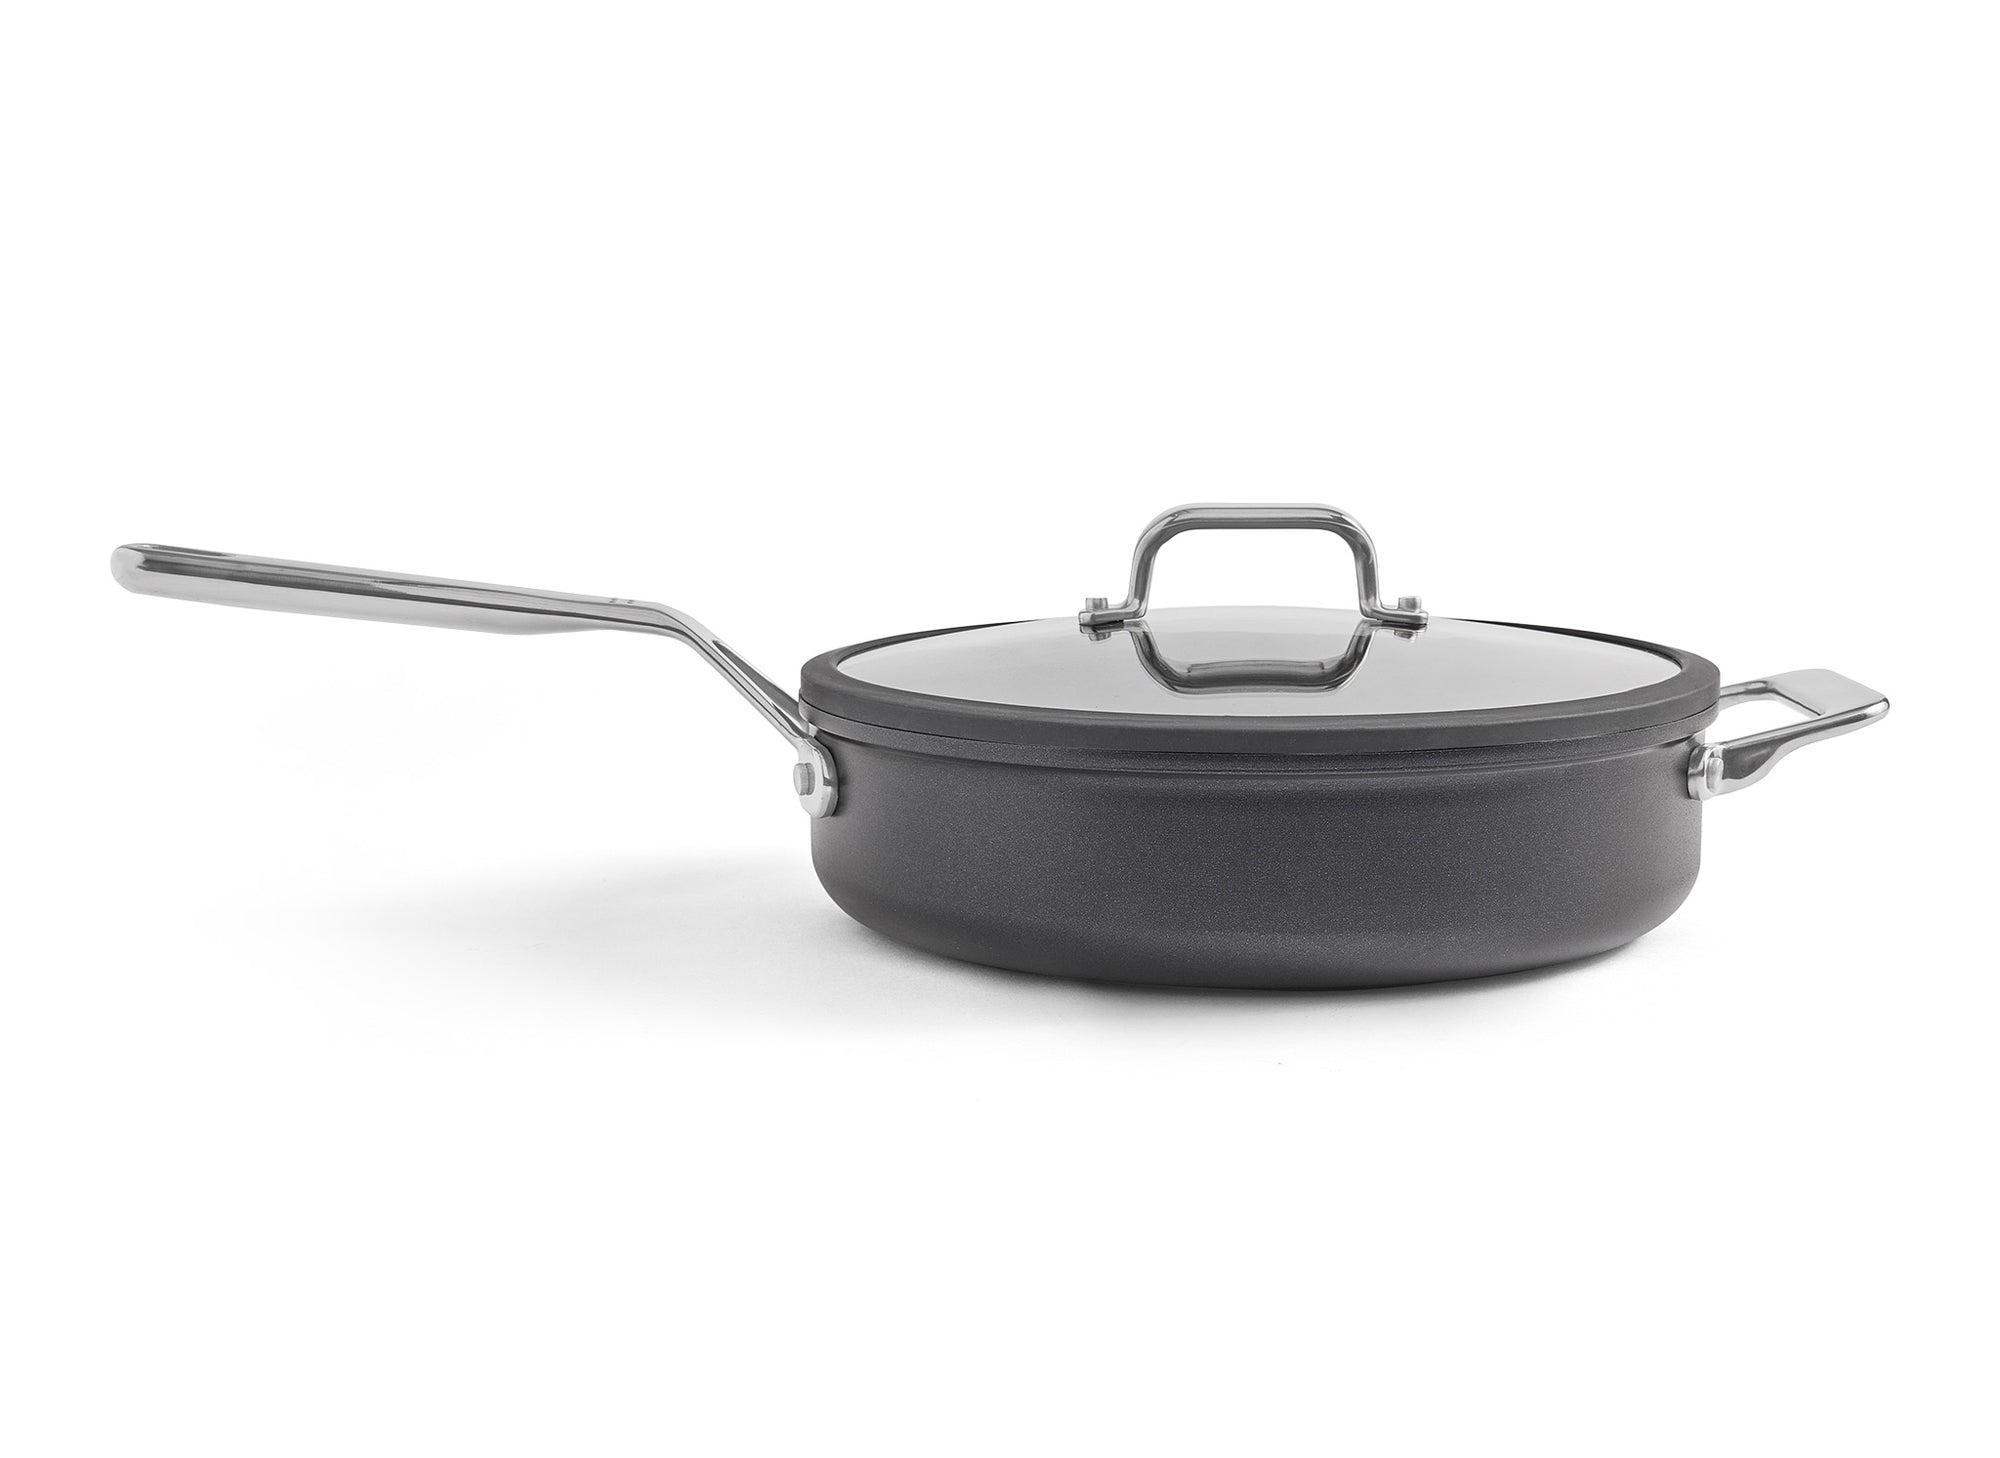 A sideways view of the Misen 3 QT Nonstick Sauté Pan, with lid on, on a white background.